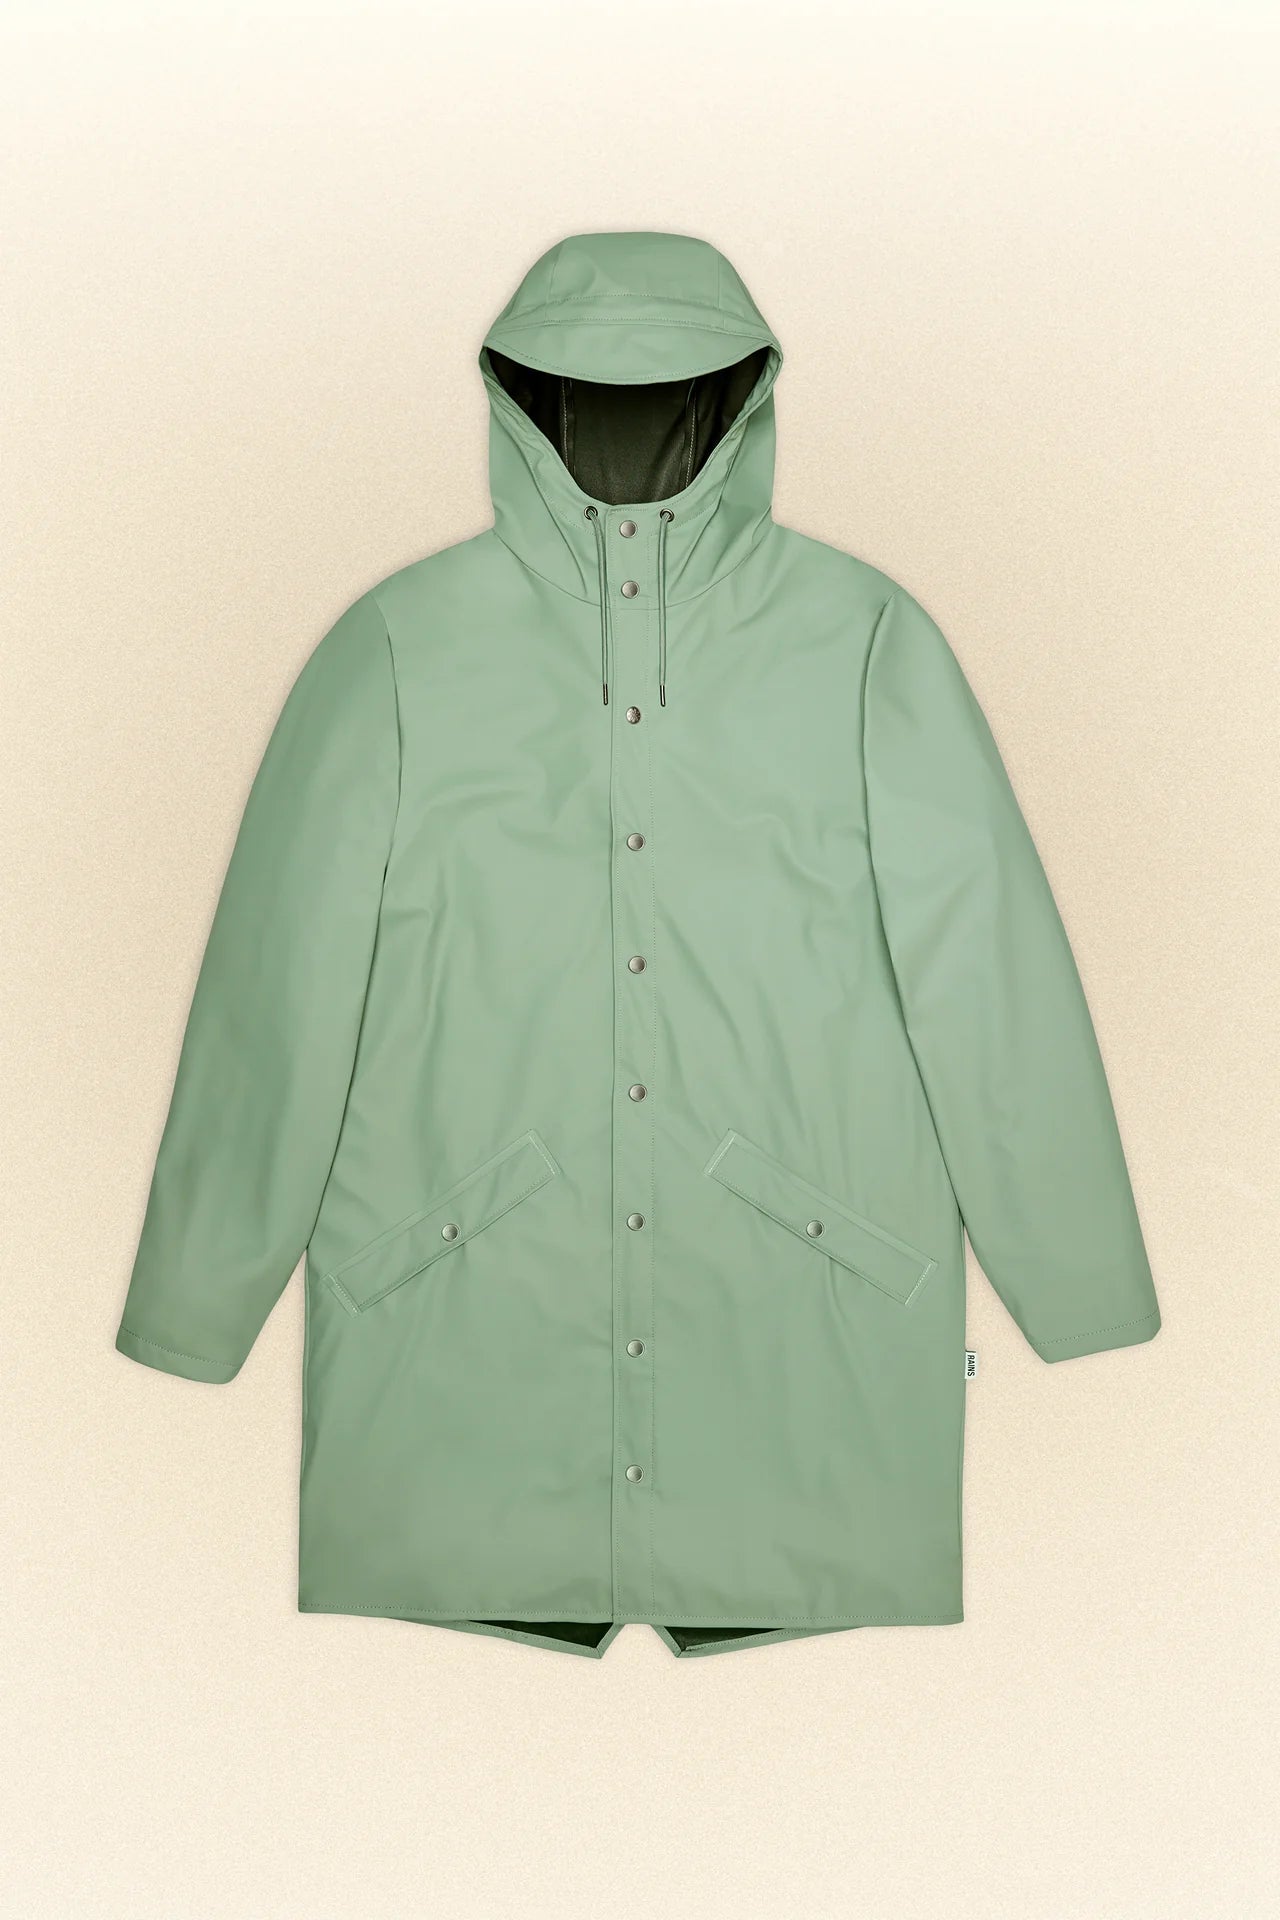 A waterproof Rains Long Jacket on a white background.